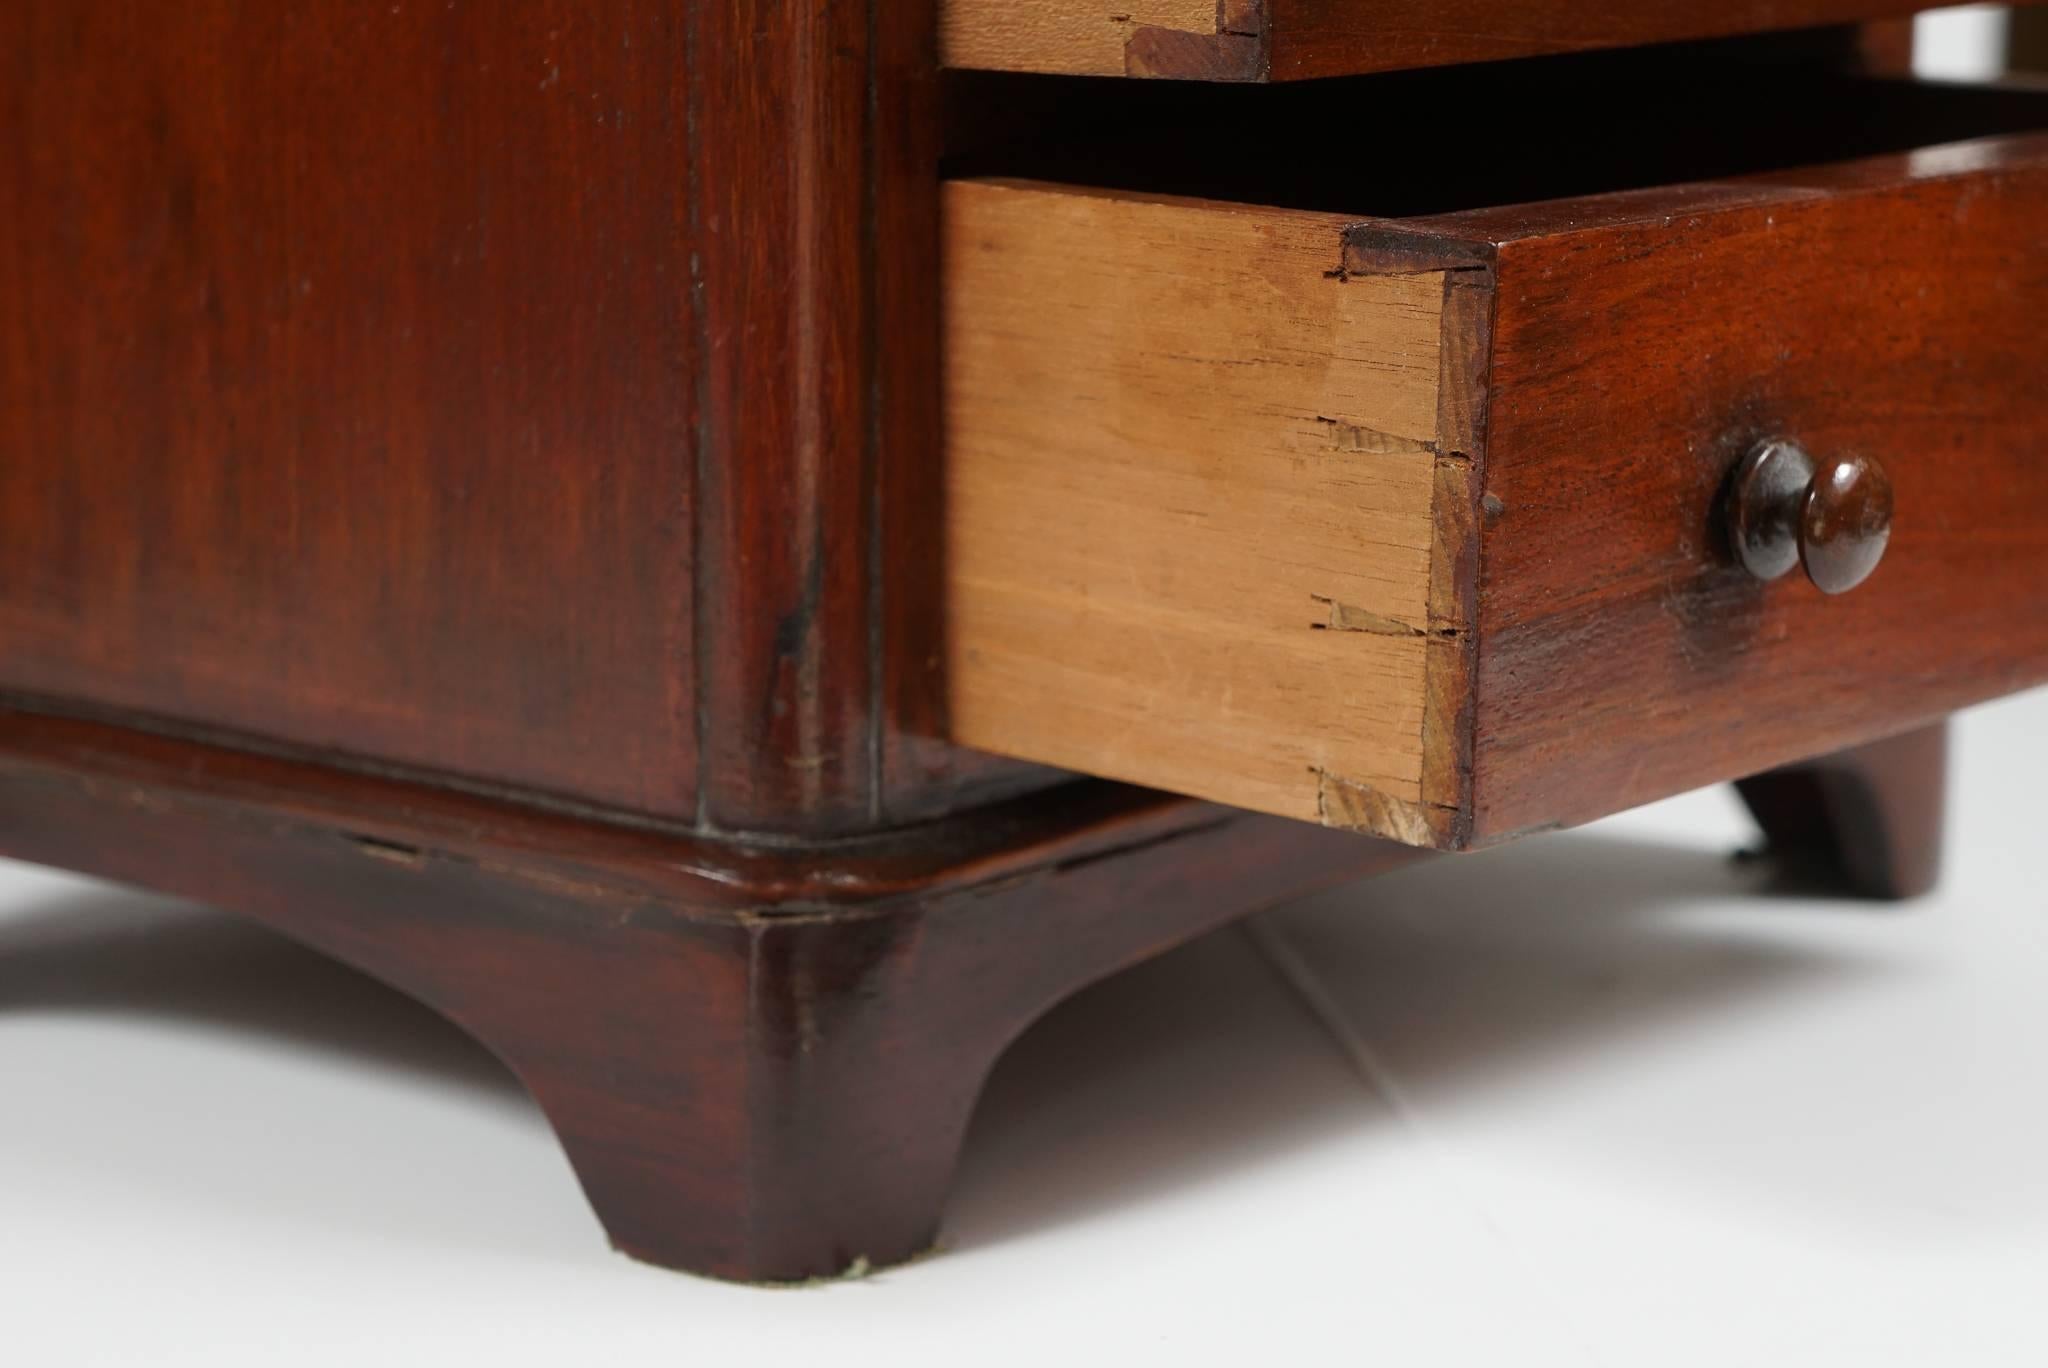 Carved Collection of Regency Mahogany Items from the Estate of Paul & Bunny Mellon